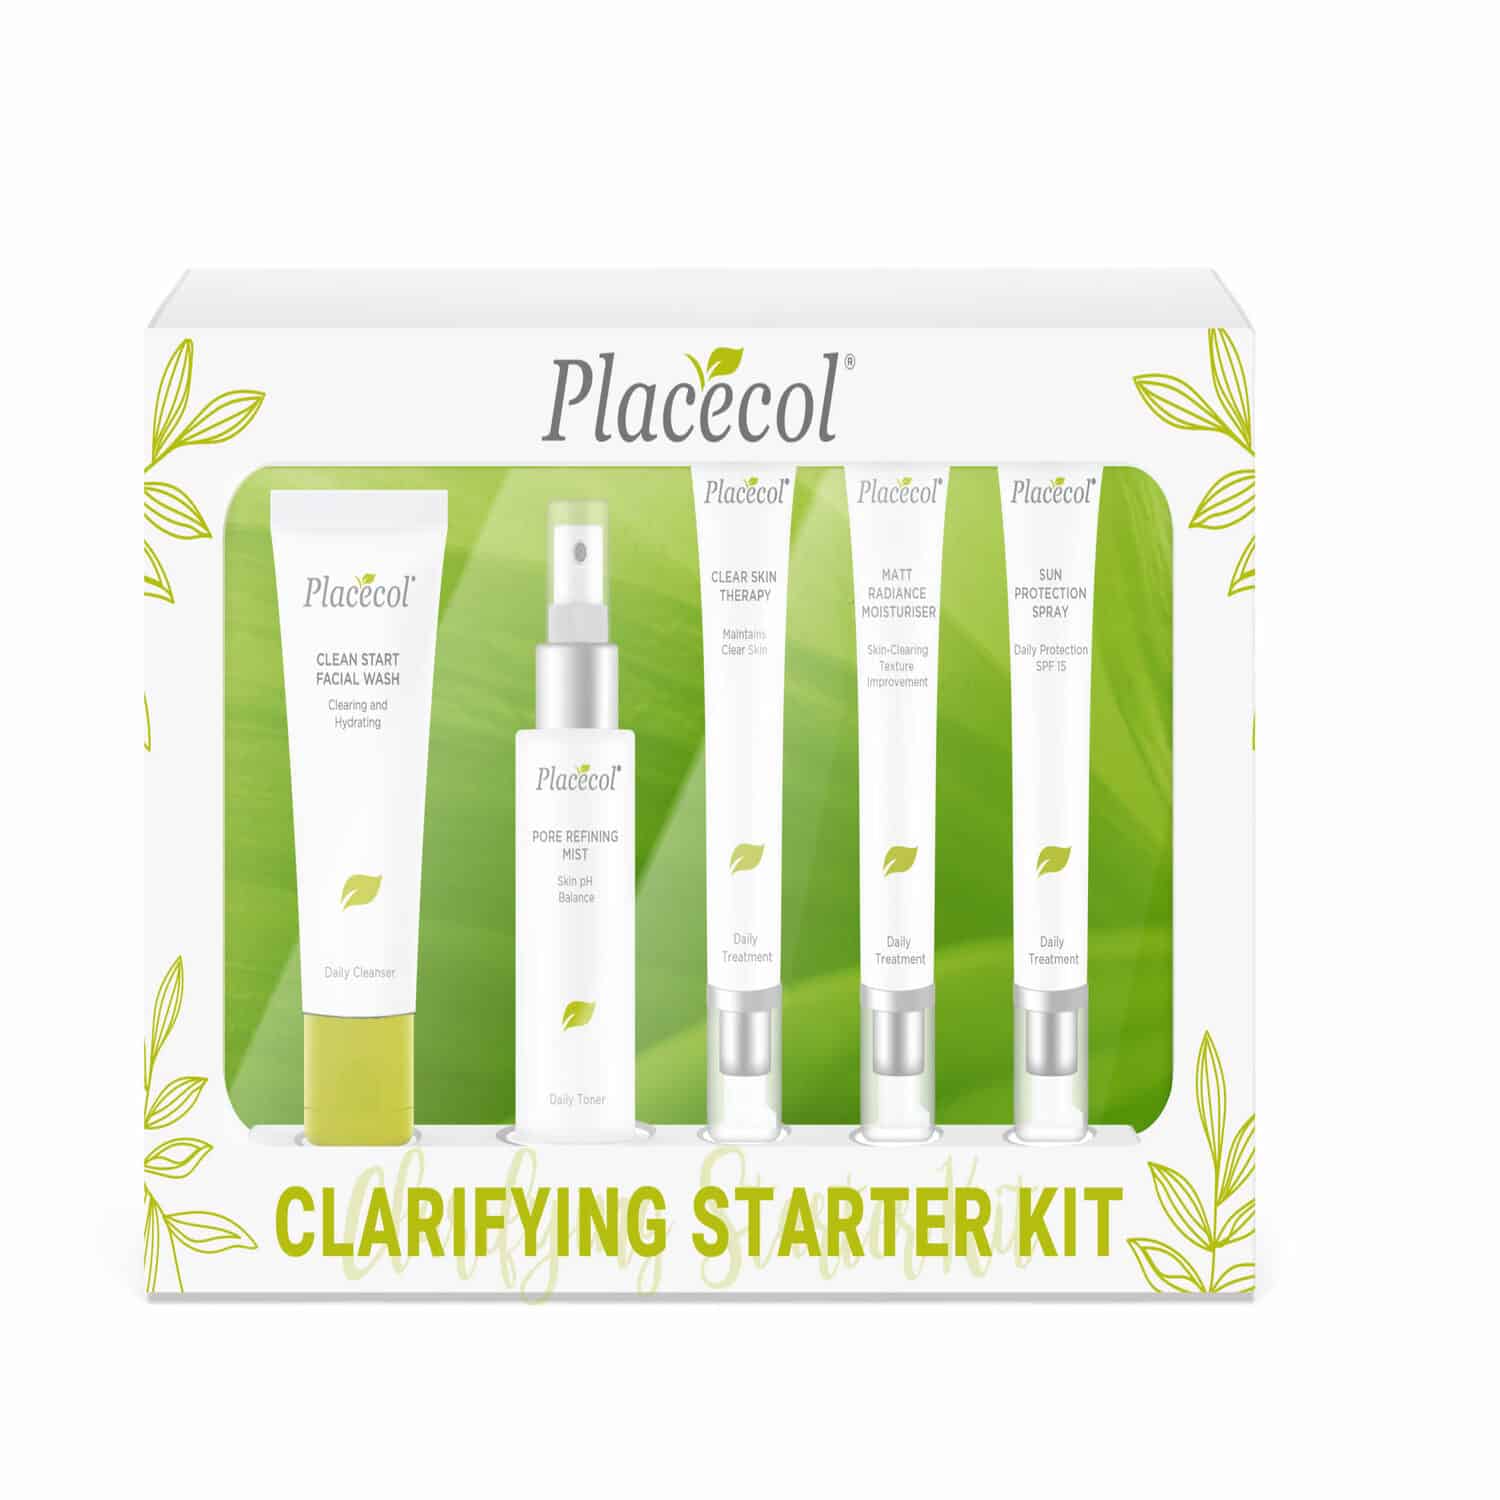 Placcecol Clarifying Starter Kit